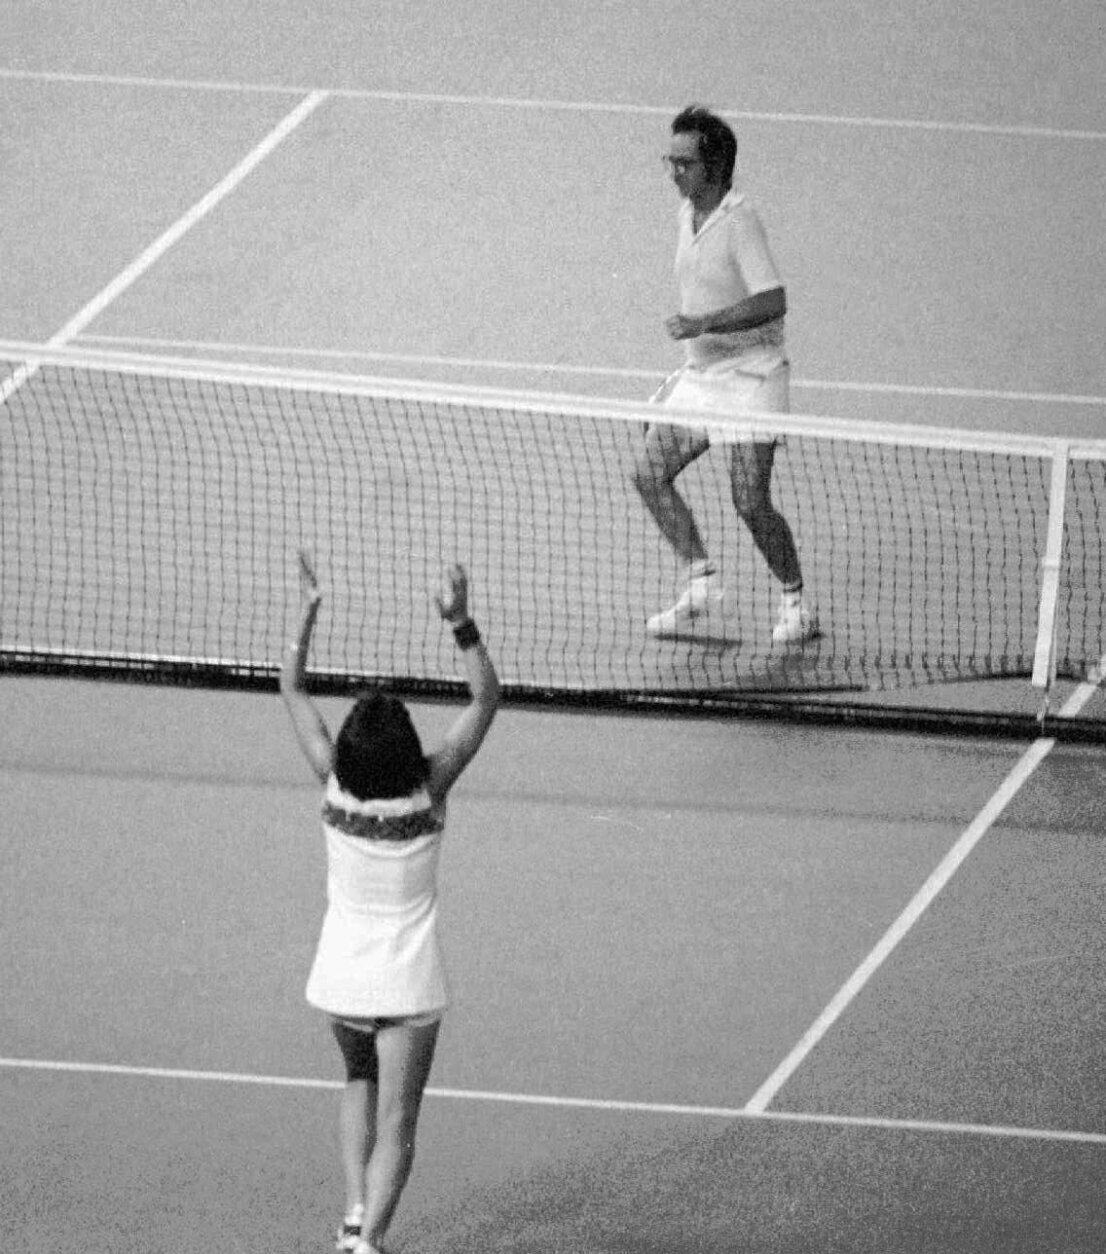 FILE - In this Sept. 20, 1973, file photo, Billie Jean King raises her arms after defeating Bobby Riggs, rear, getting ready to jump over the net, in the "Battle of the Sexes" tennis match at the Houston Astrodome. The story of the early days of the tour and King's fight for equal prize money is chronicled in the movie "Battle of the Sexes," which opened nationwide on Friday.  (AP Photo, File)